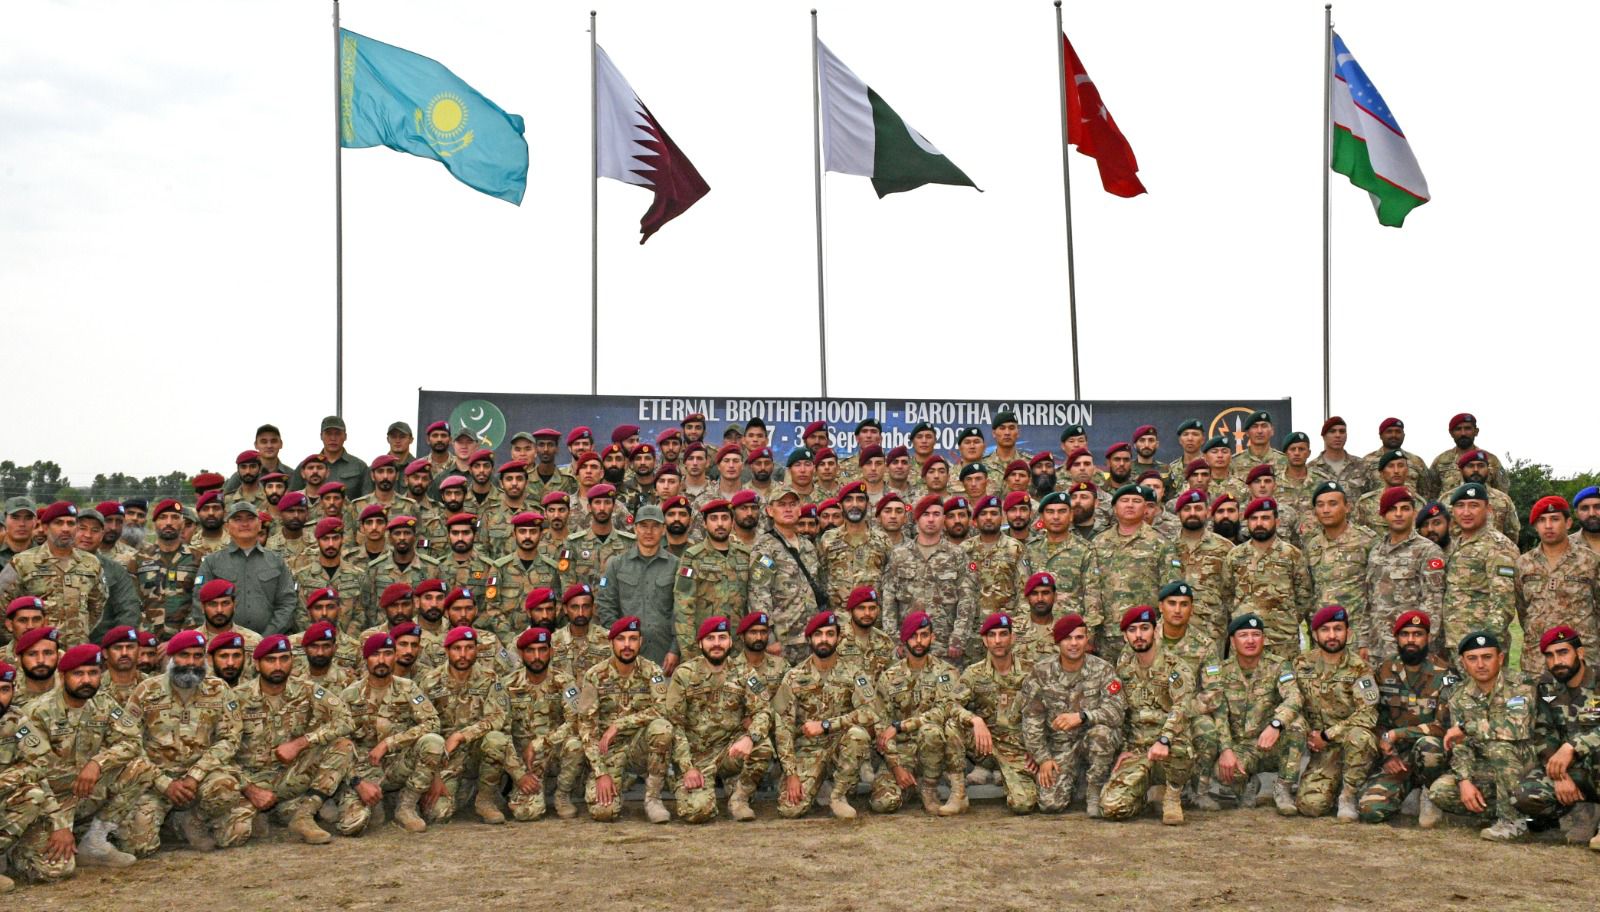 Multinational Joint Special Forces Exercise Eternal Brotherhood-II has been conducted.